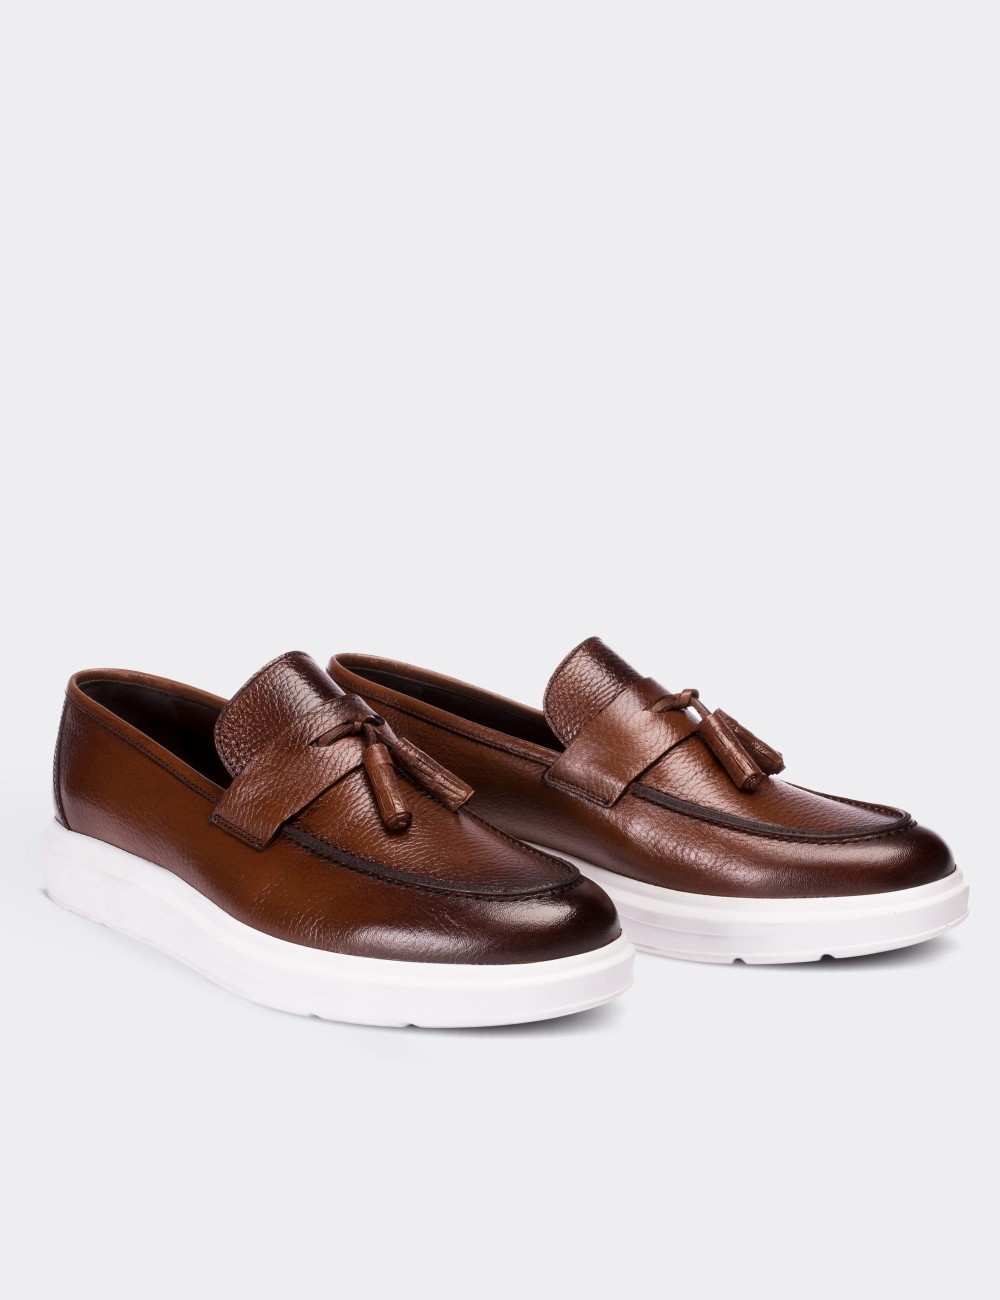 Tan  Leather Loafers - 01587MTBAP03